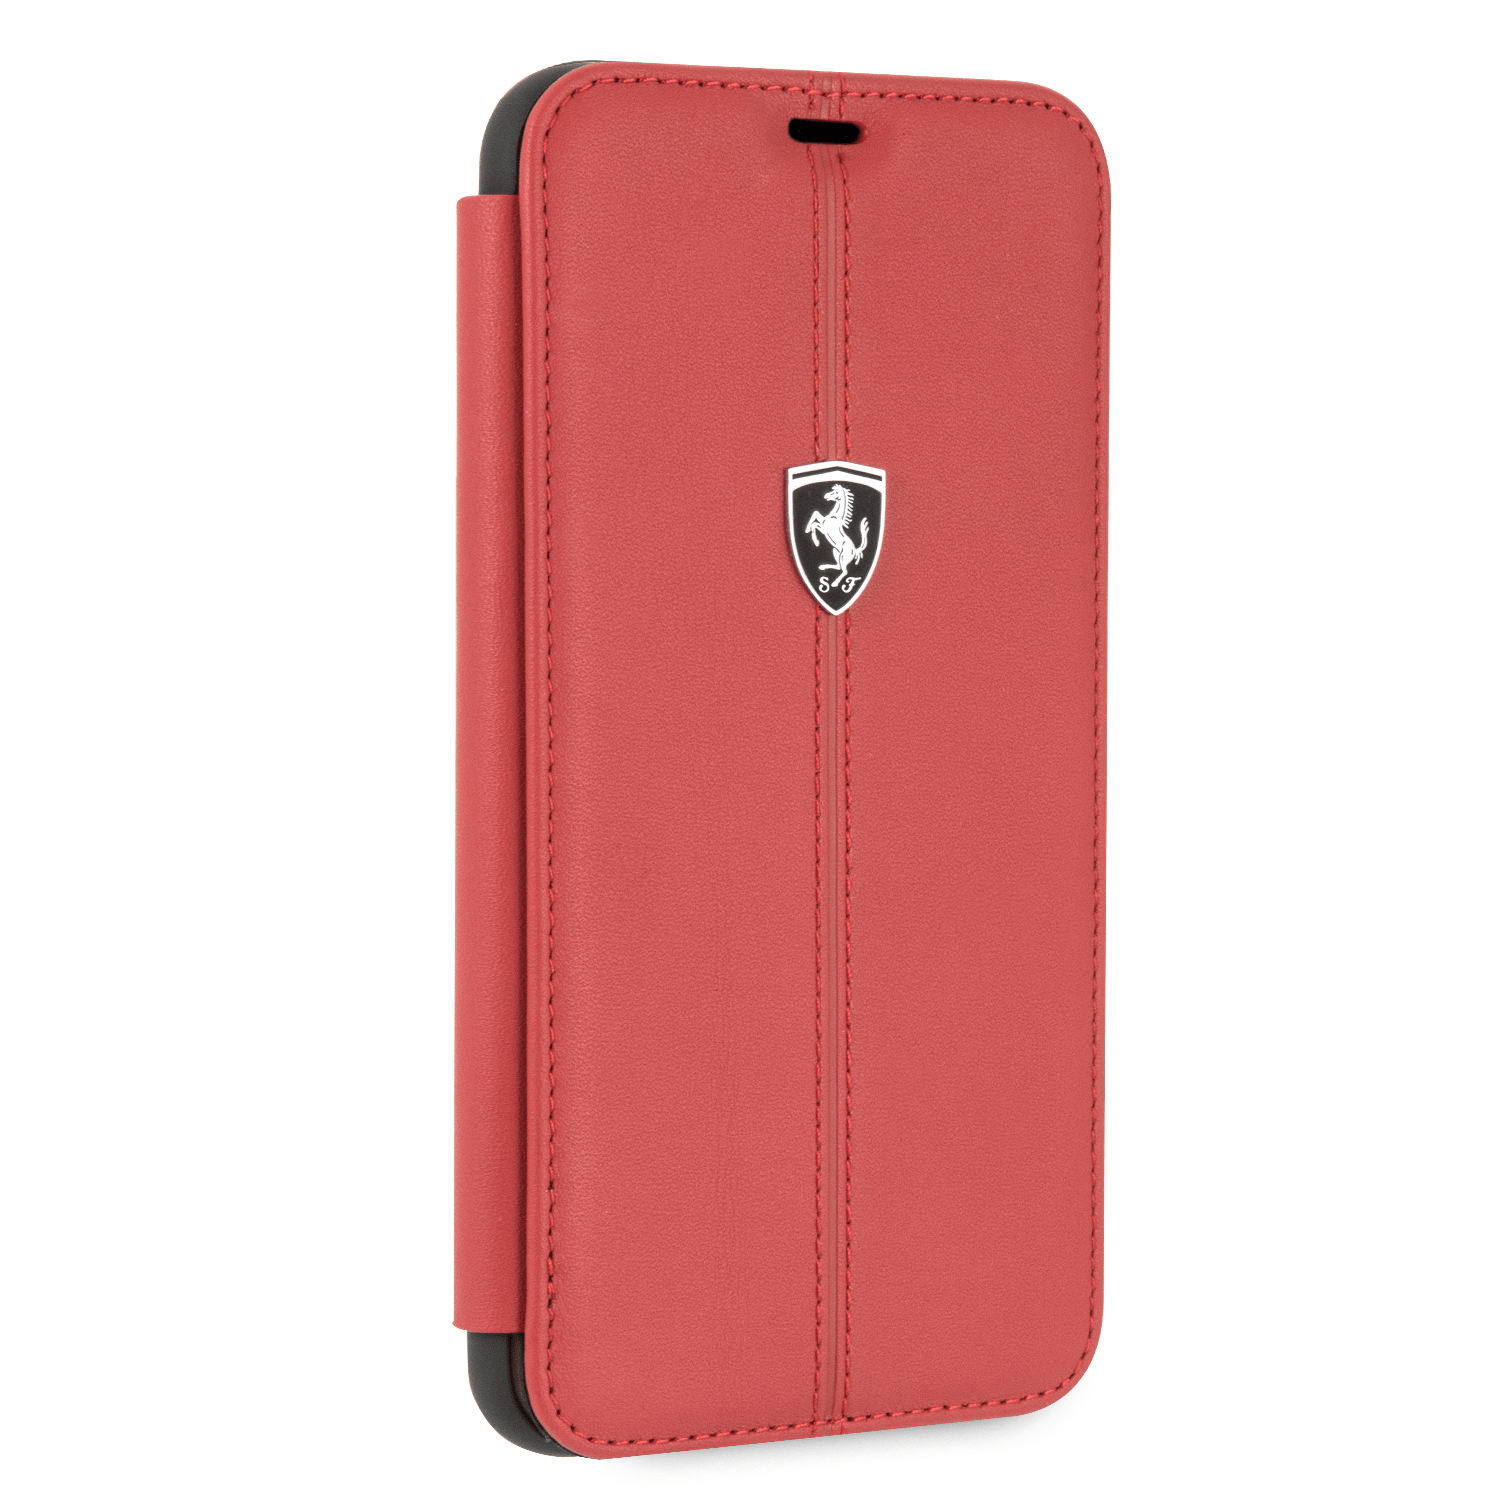 Crafted to provide protection for your smartphone while adding a touch of sophistication, this case combines style with functionality